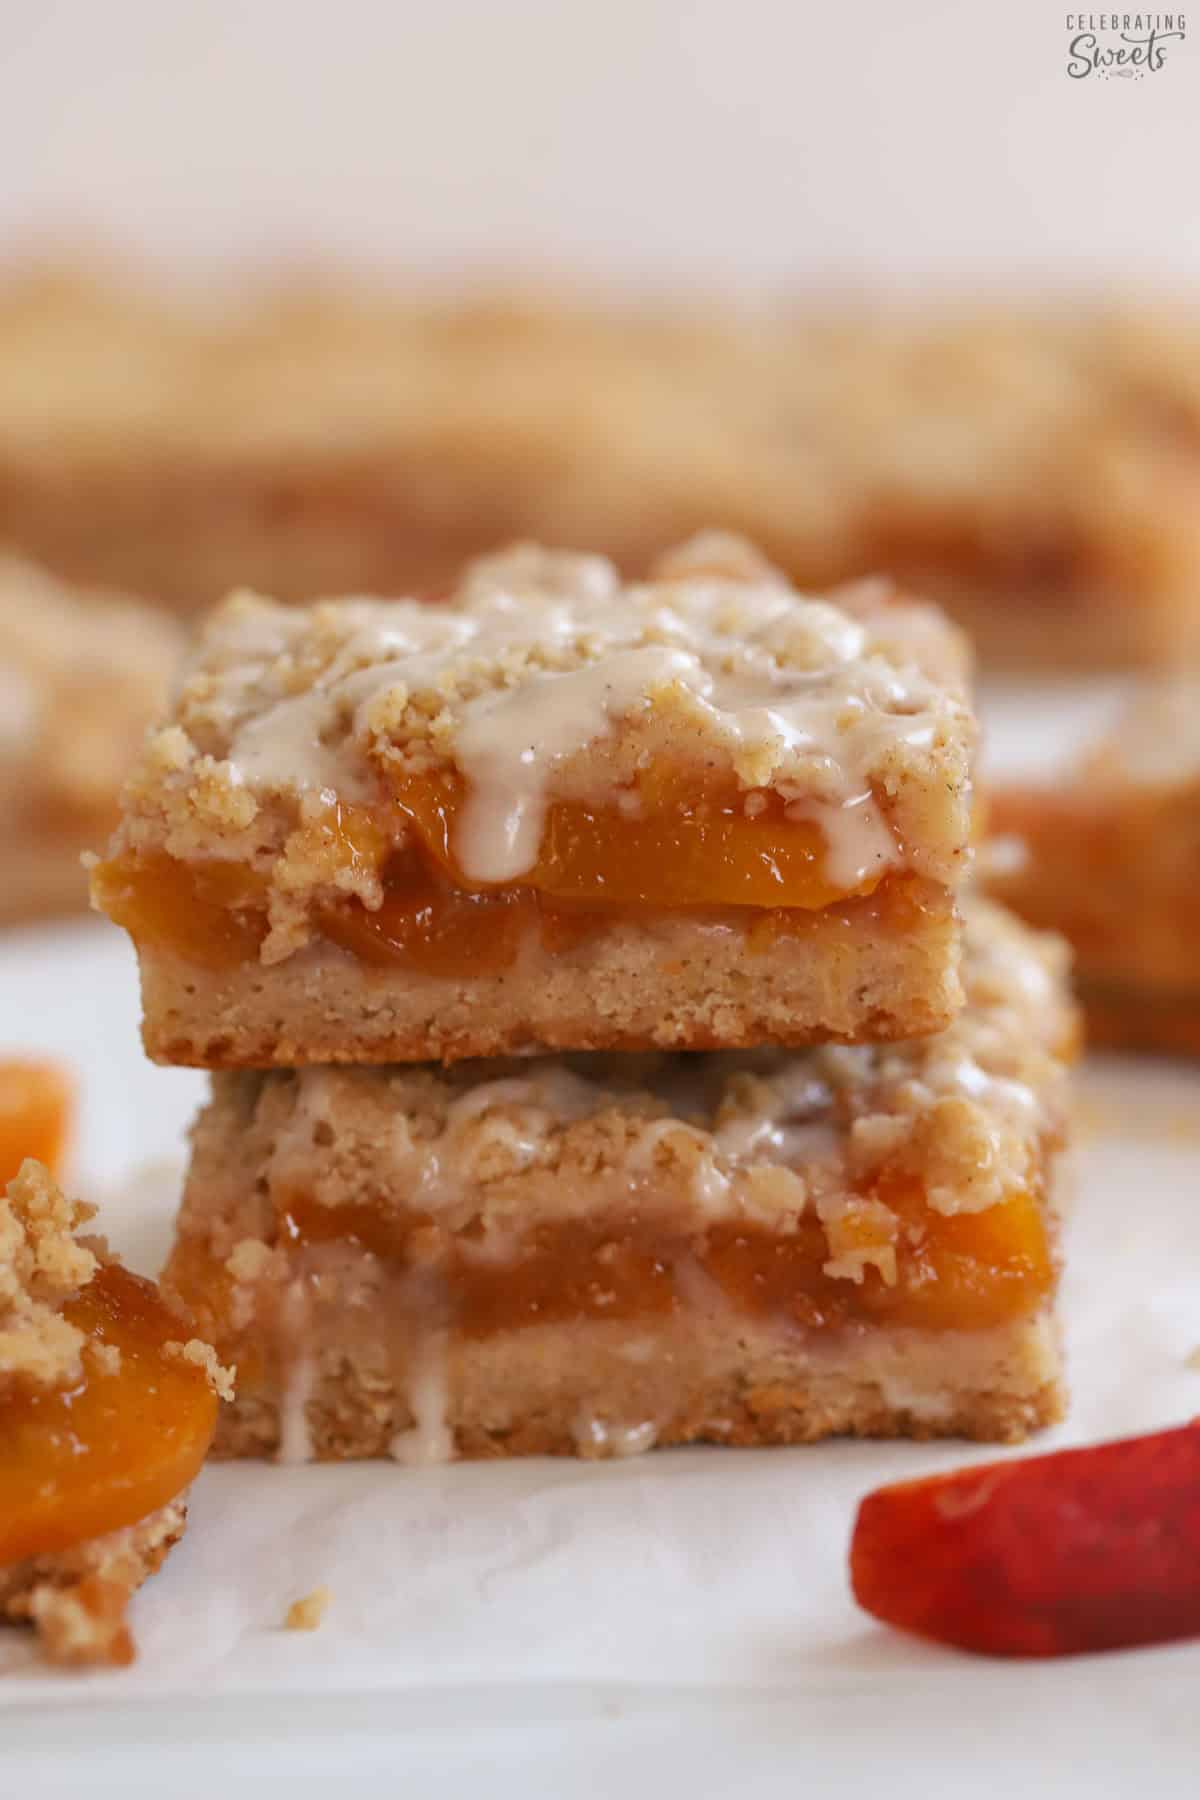 Stack of two peach crumb bars topped with white icing.